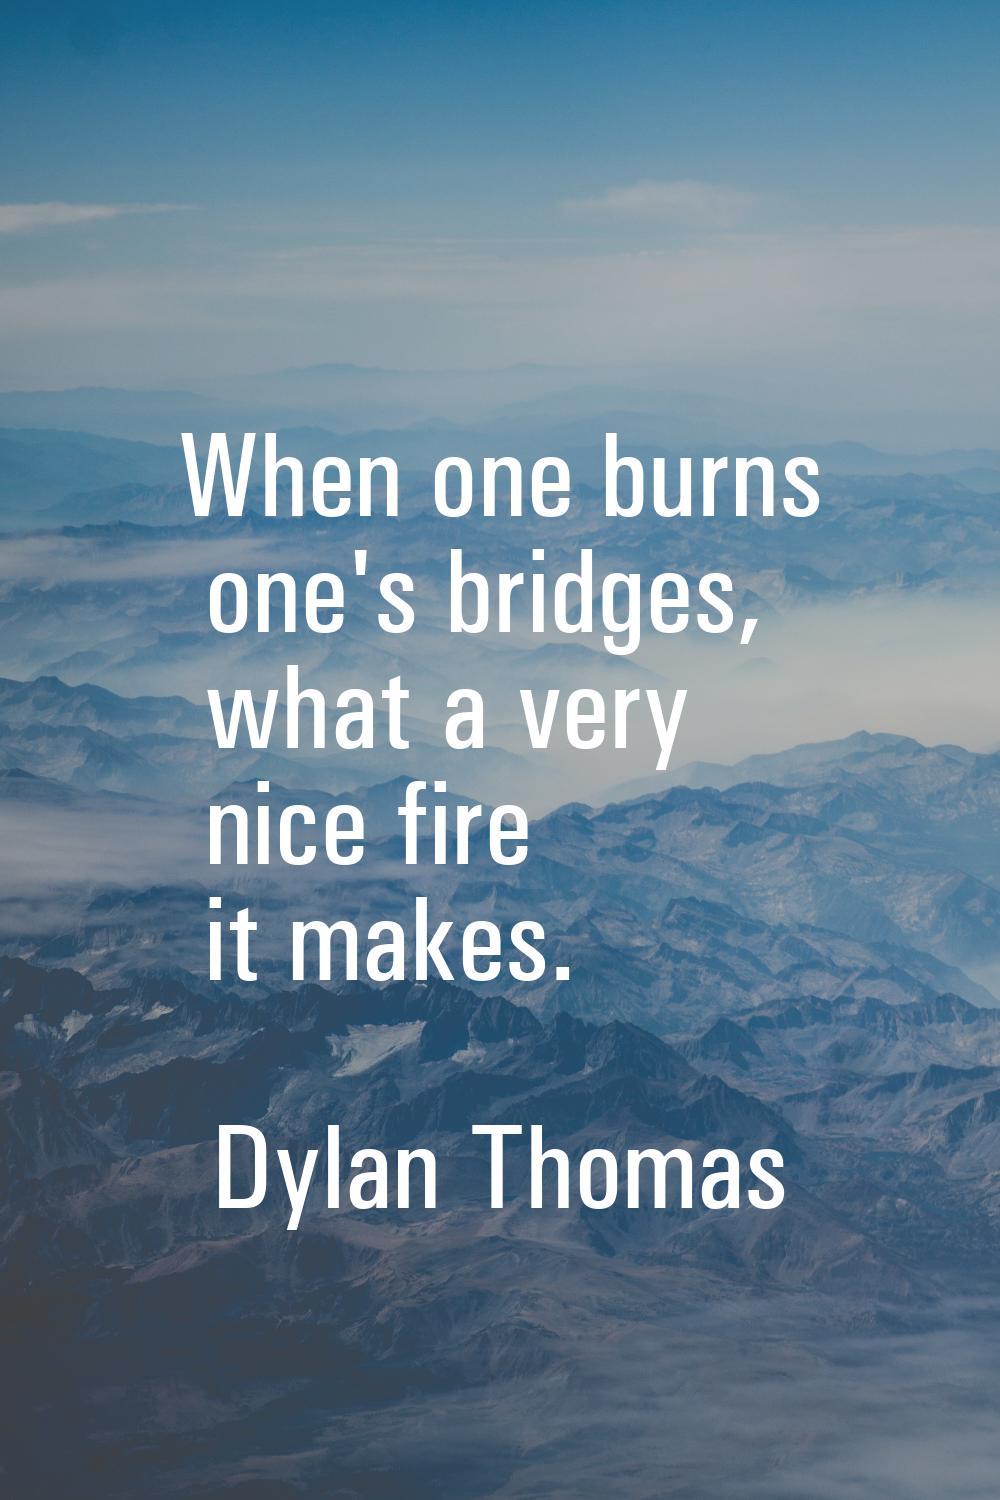 When one burns one's bridges, what a very nice fire it makes.